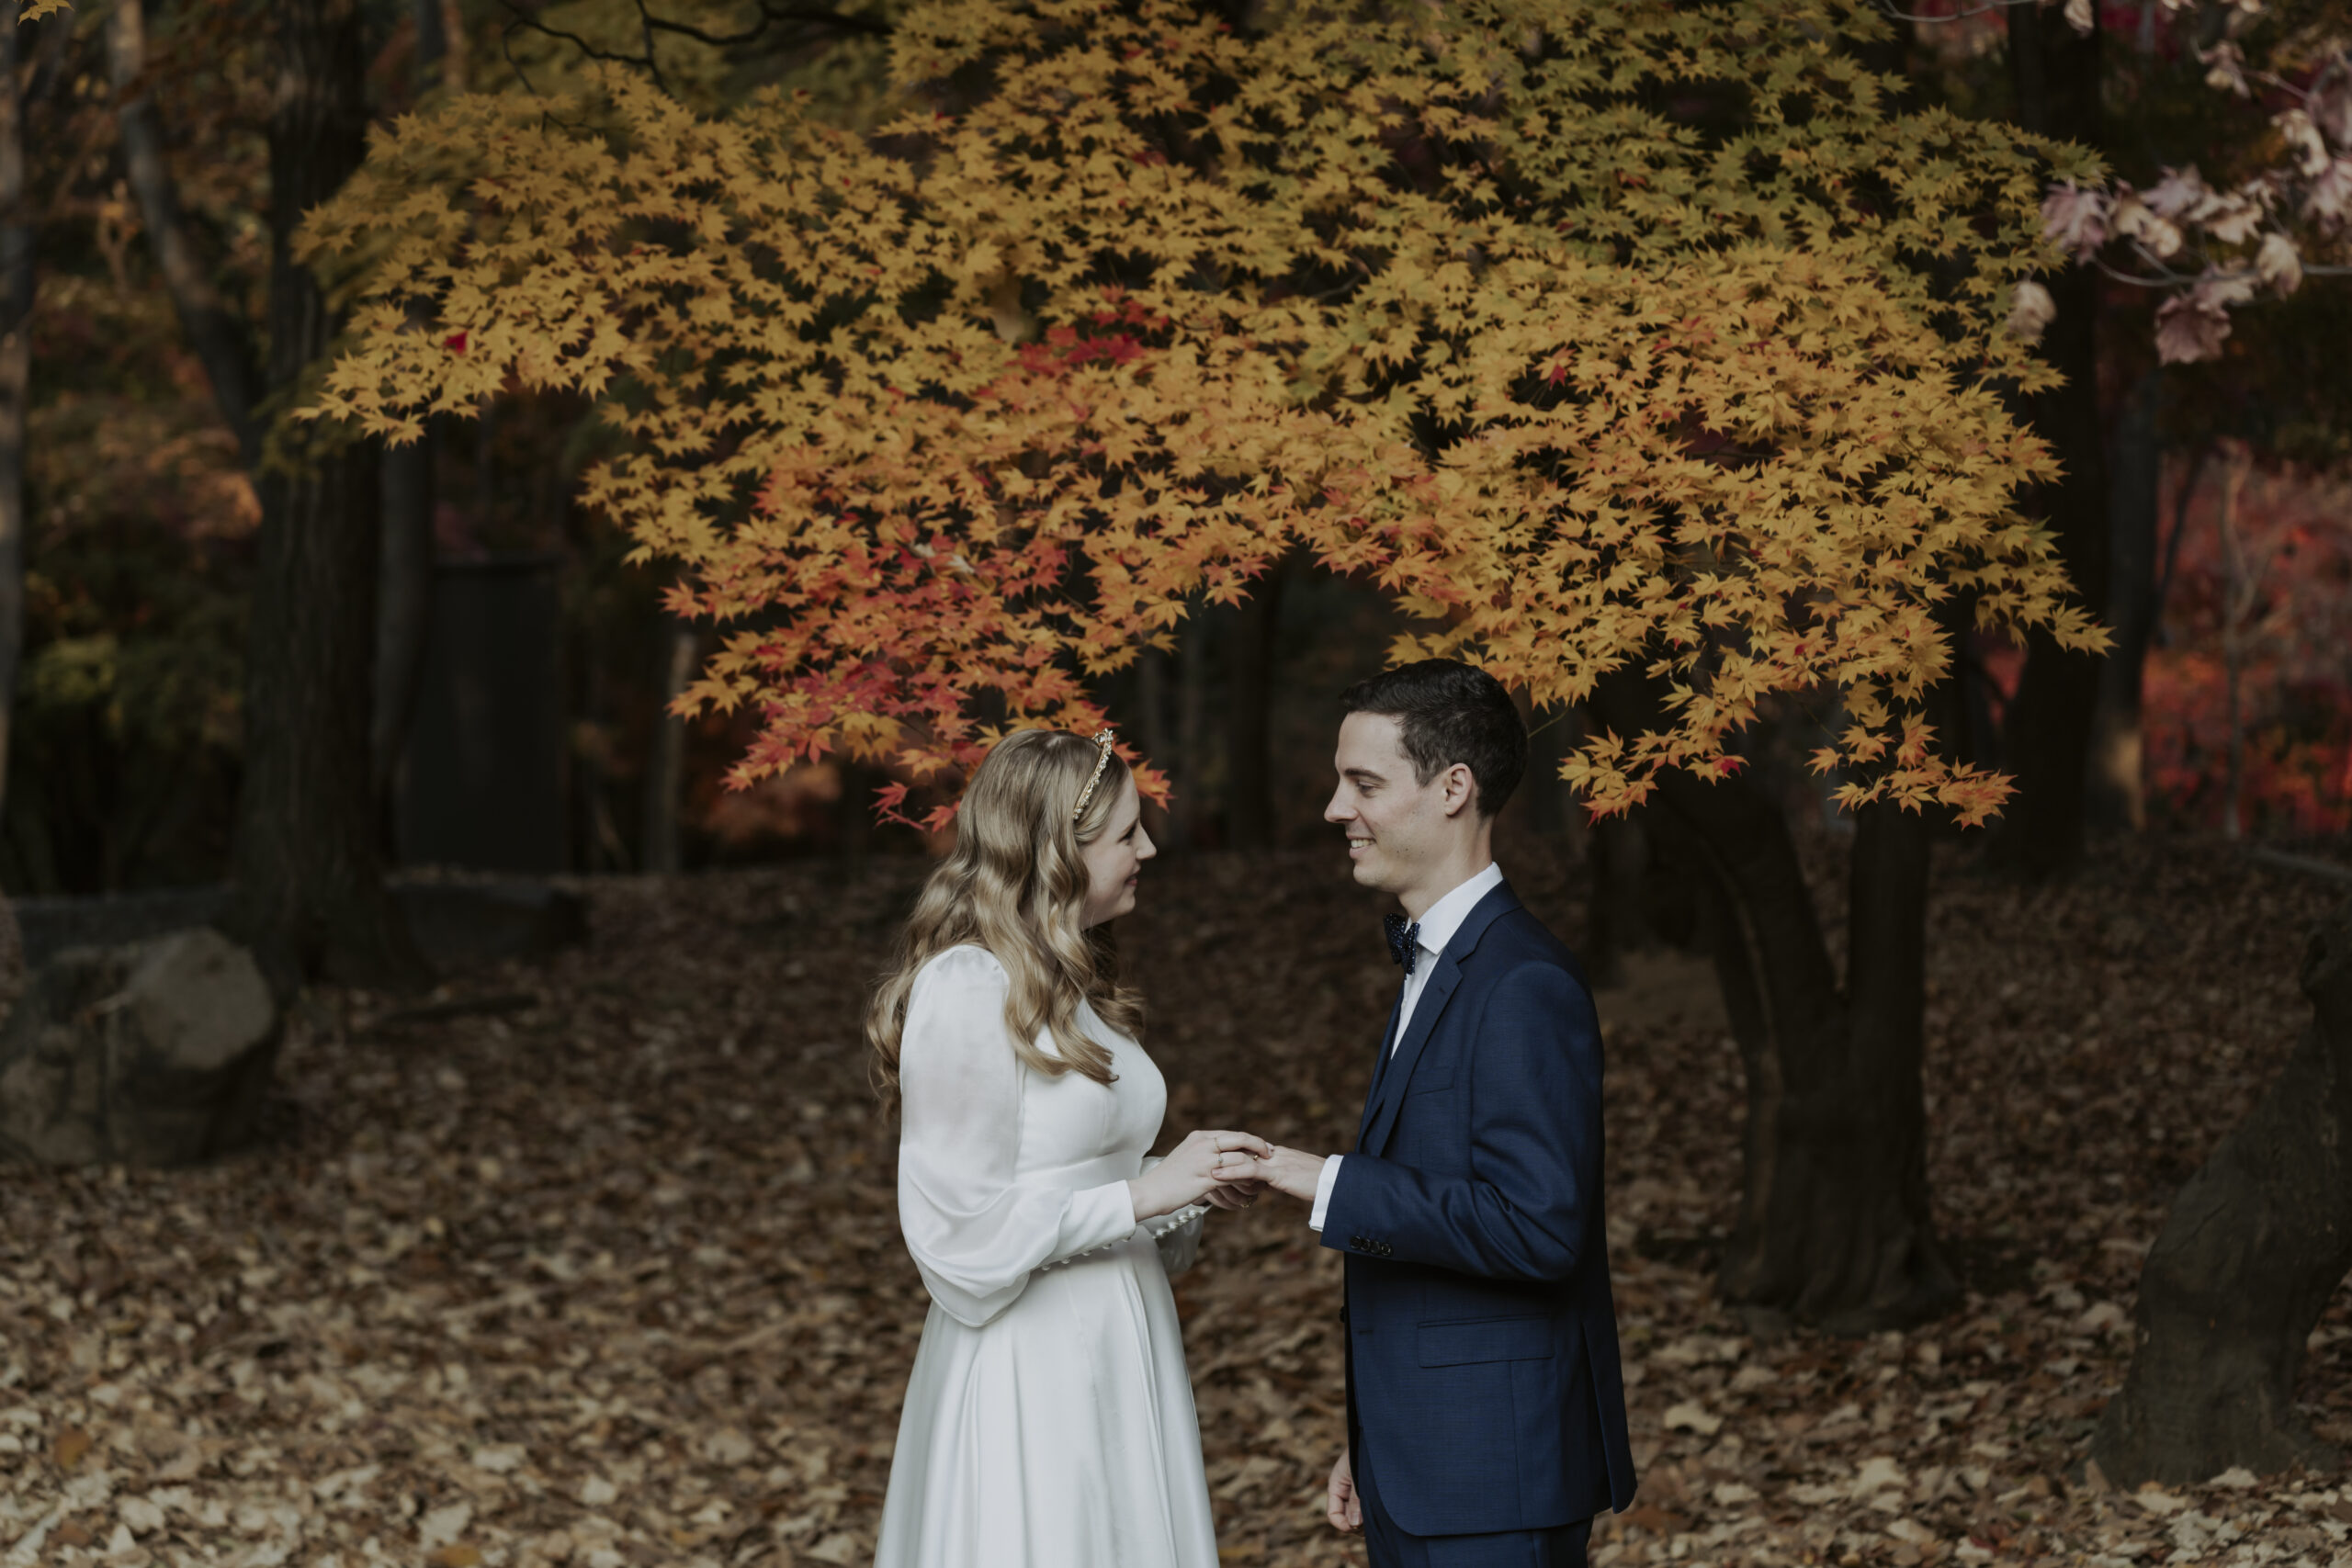 A bride and groom standing in front of a fall tree in Korea.